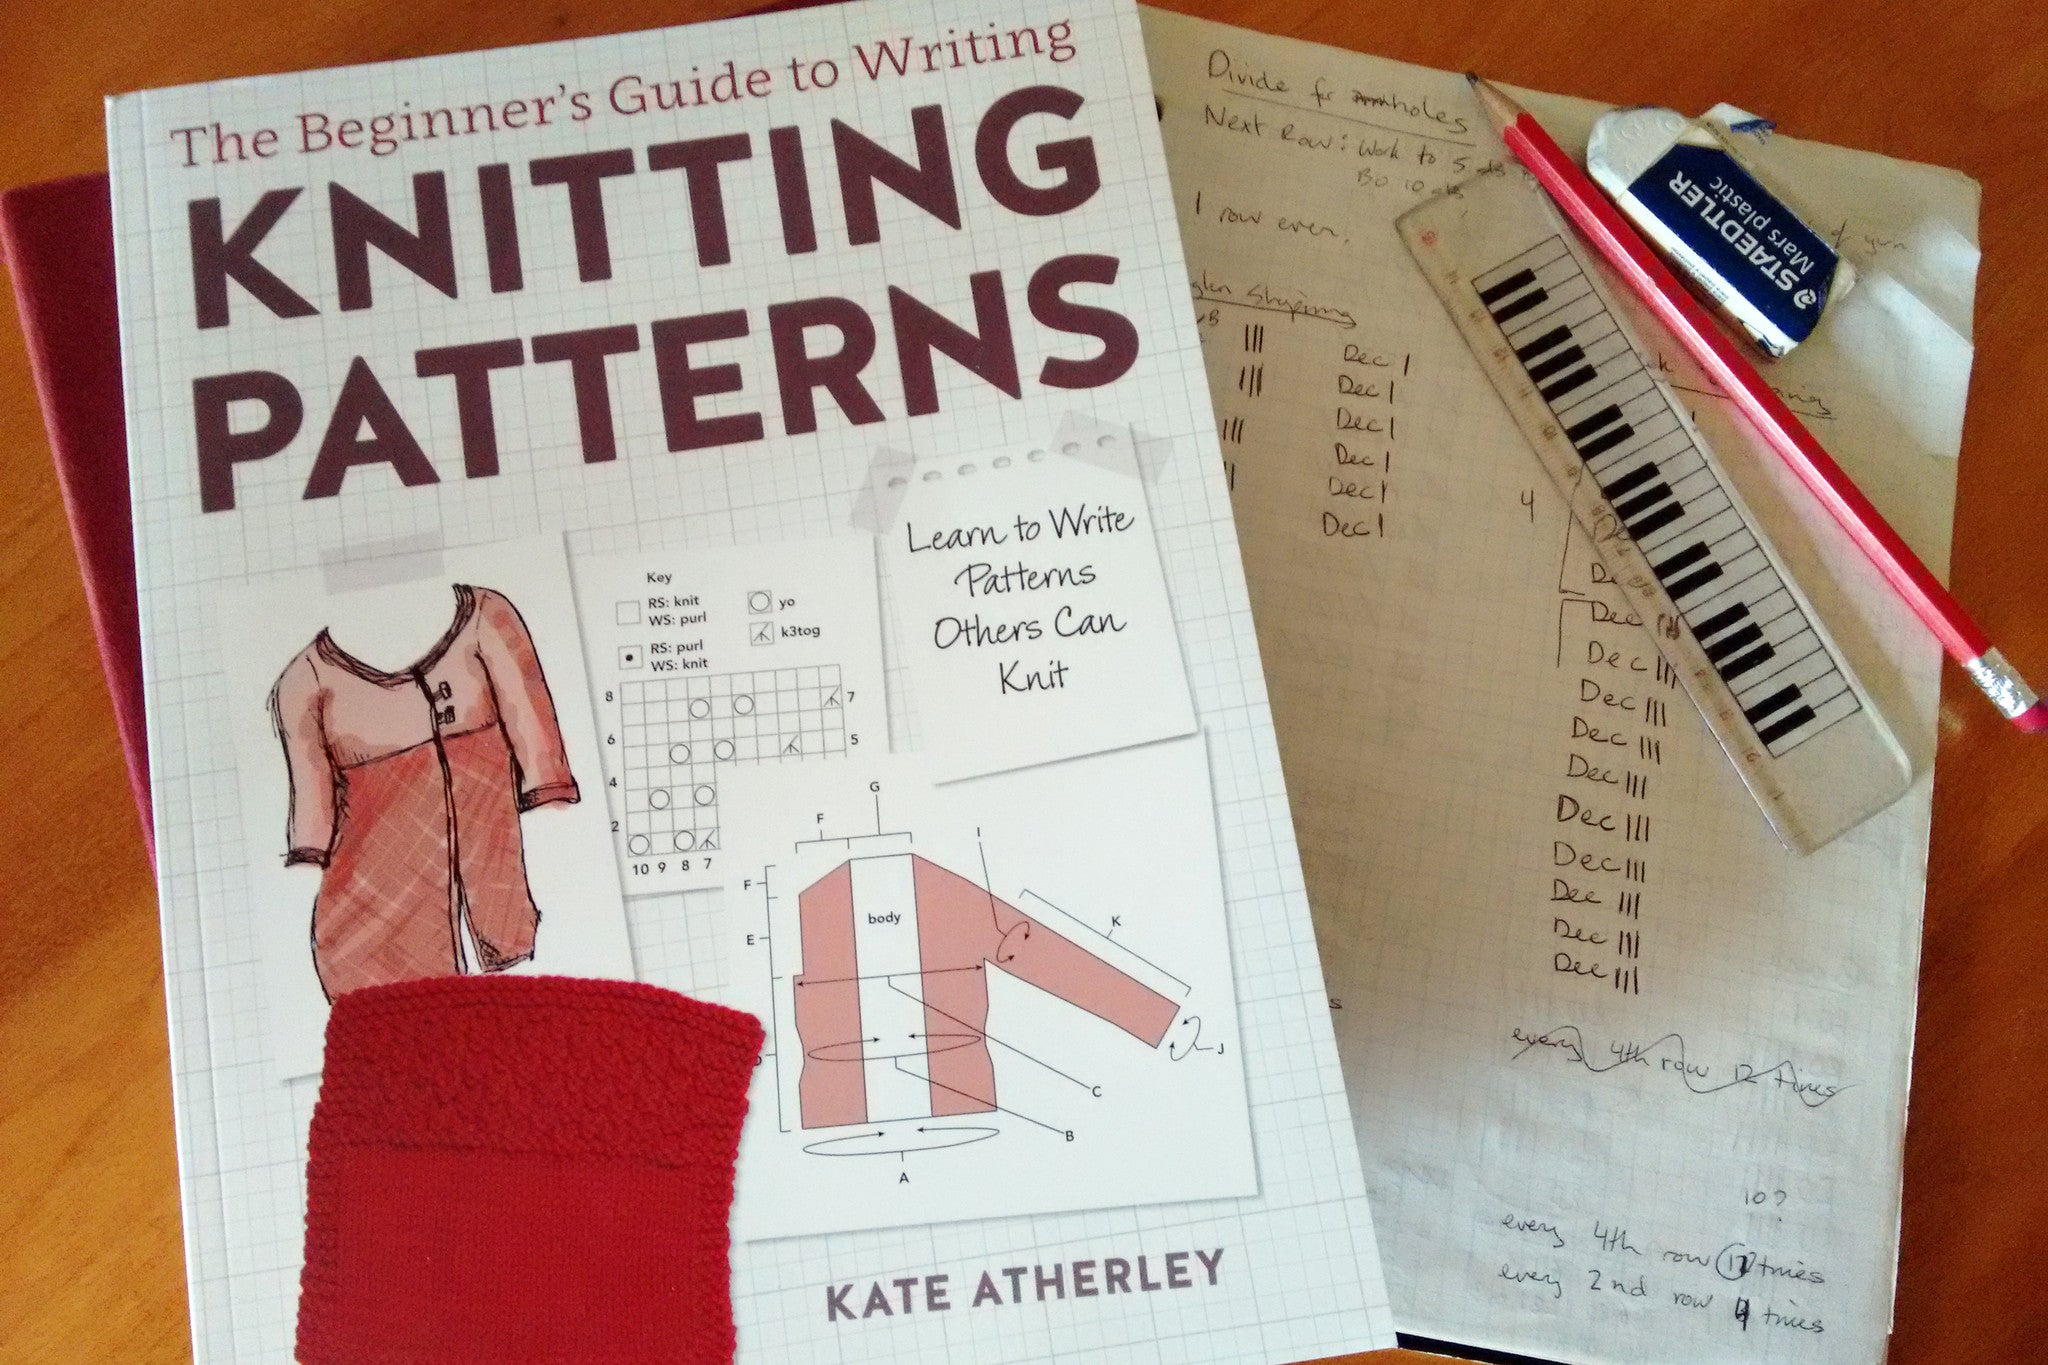 Book review: The Beginner's Guide to Writing Knitting Patterns